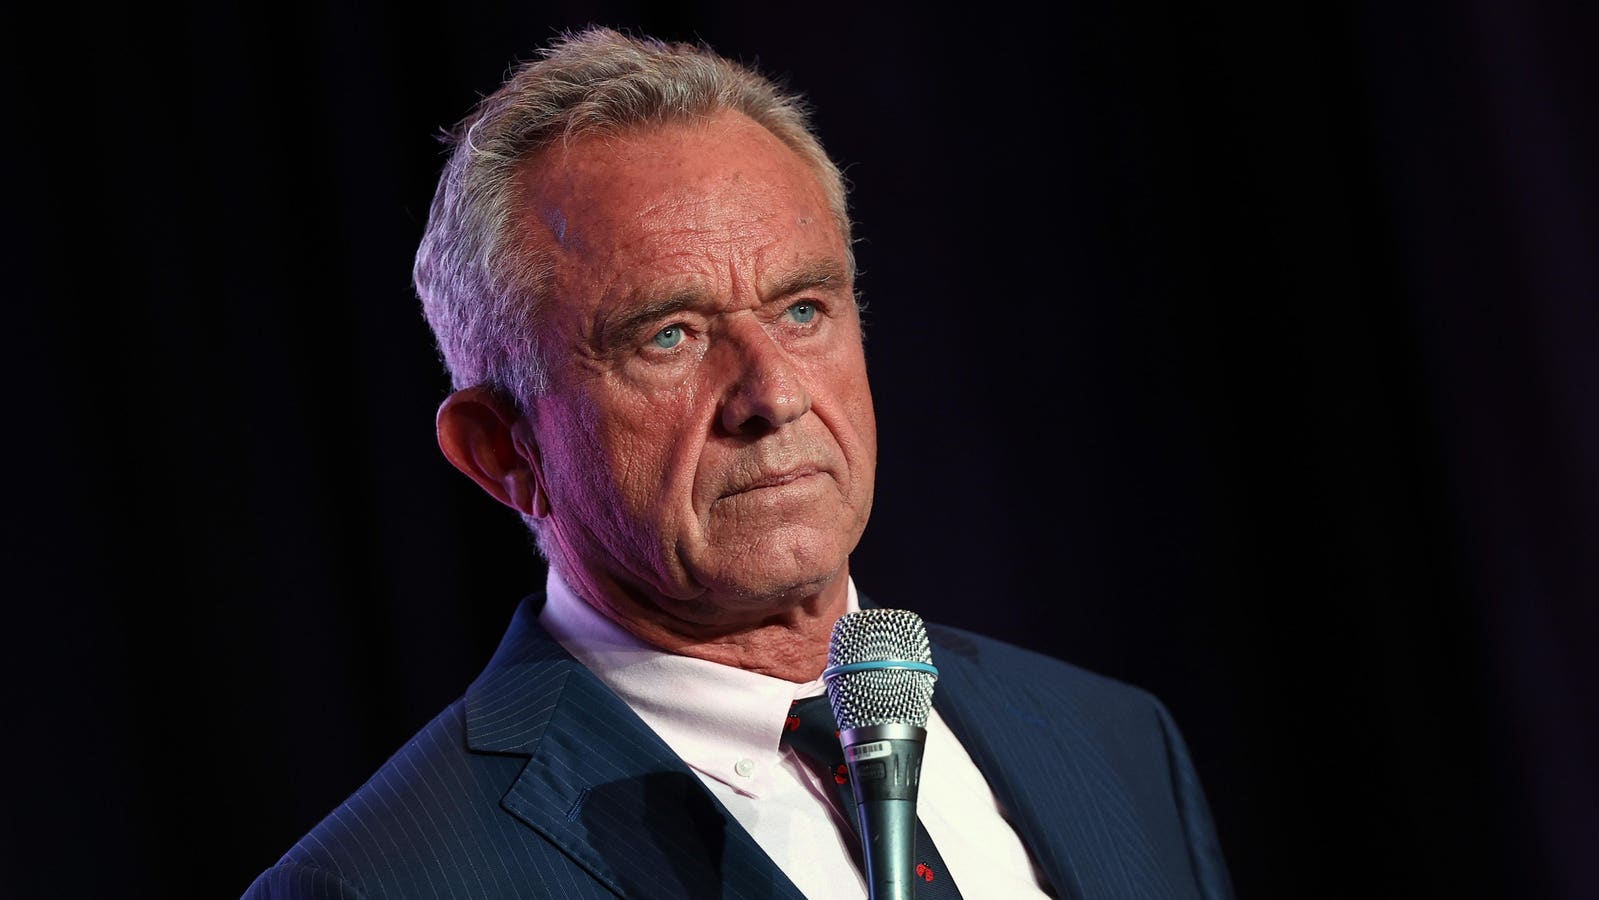 RFK Jr Texts Apology To Woman Who Accused Him Of Sexual Assault